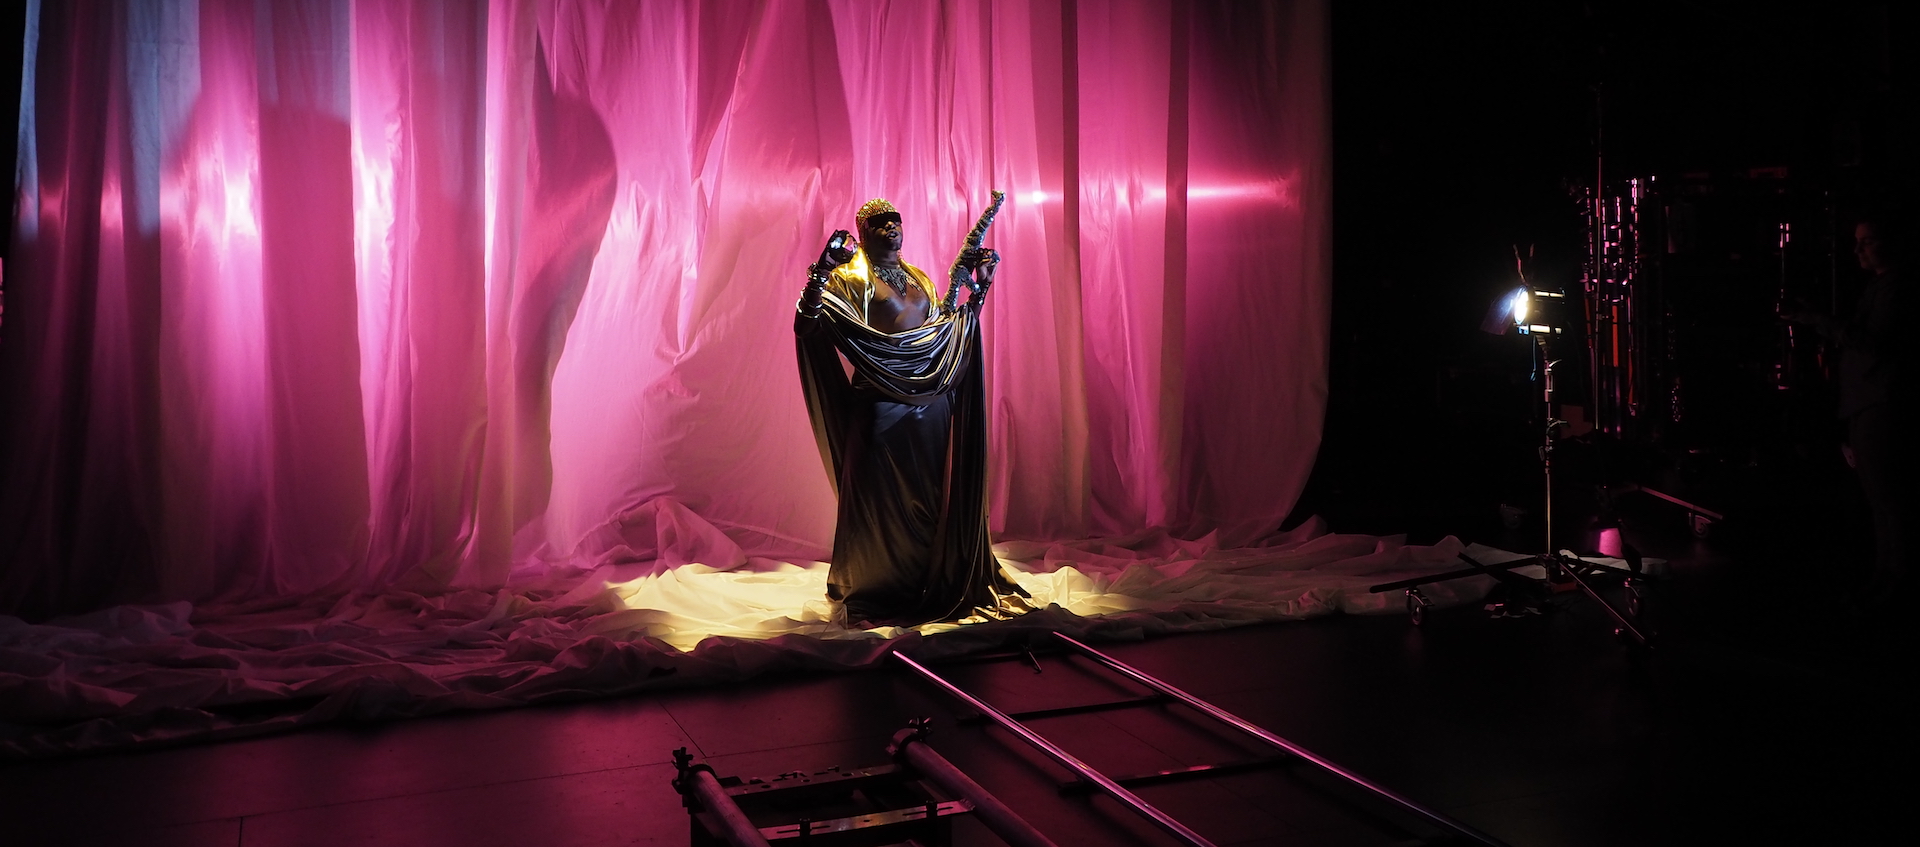 Artist Jaamil Olawale Kosoko stands against a curtain under pink lighting, holding a foil-covered toy machine gun, as he shoots a short film for his American Chameleon project